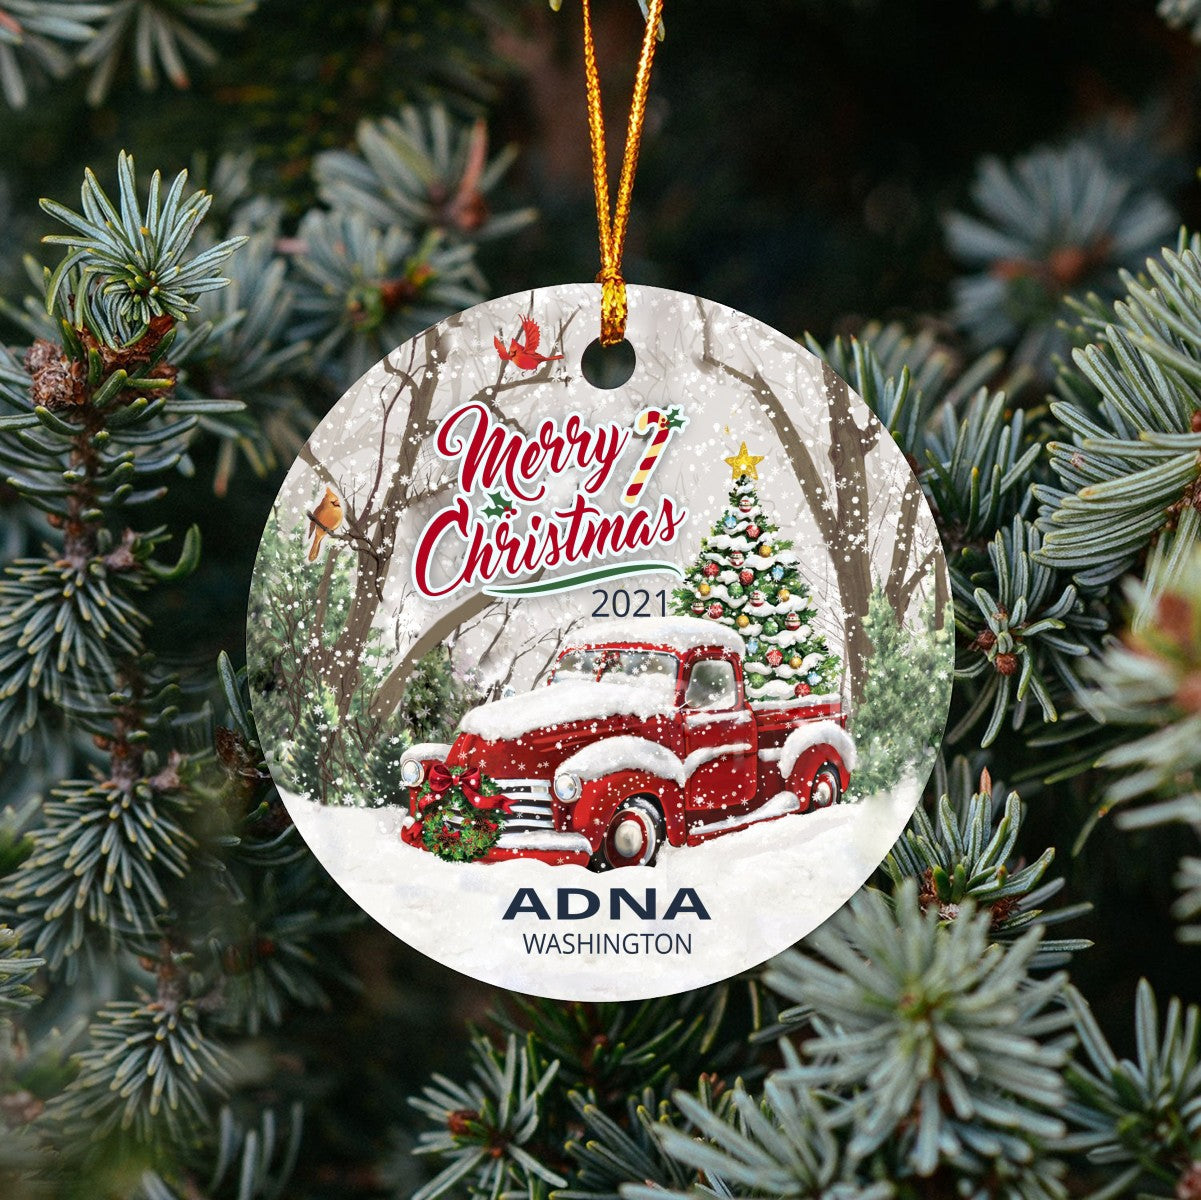 Christmas Tree Ornaments Adna - Ornament With Name City, State Adna Washington WA Ornament - Red Truck Xmas Ornaments 3'' Plastic Gift For Family, Friend And Housewarming